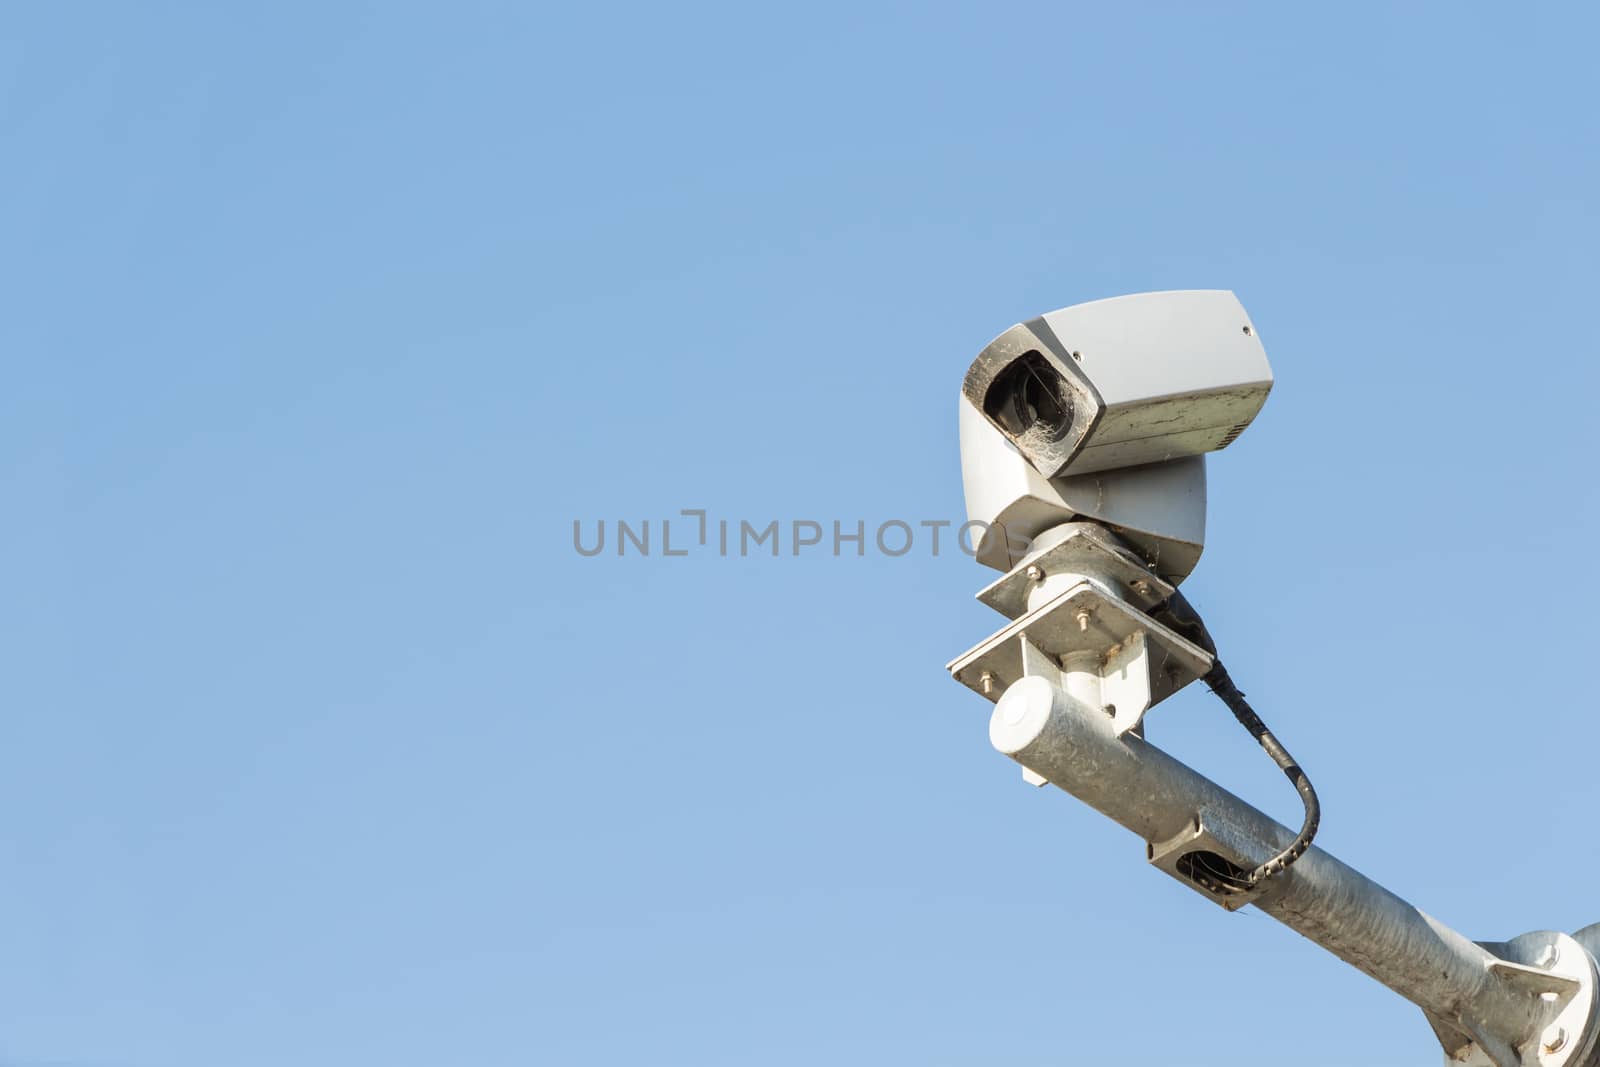 Security camera isolated on blue sky